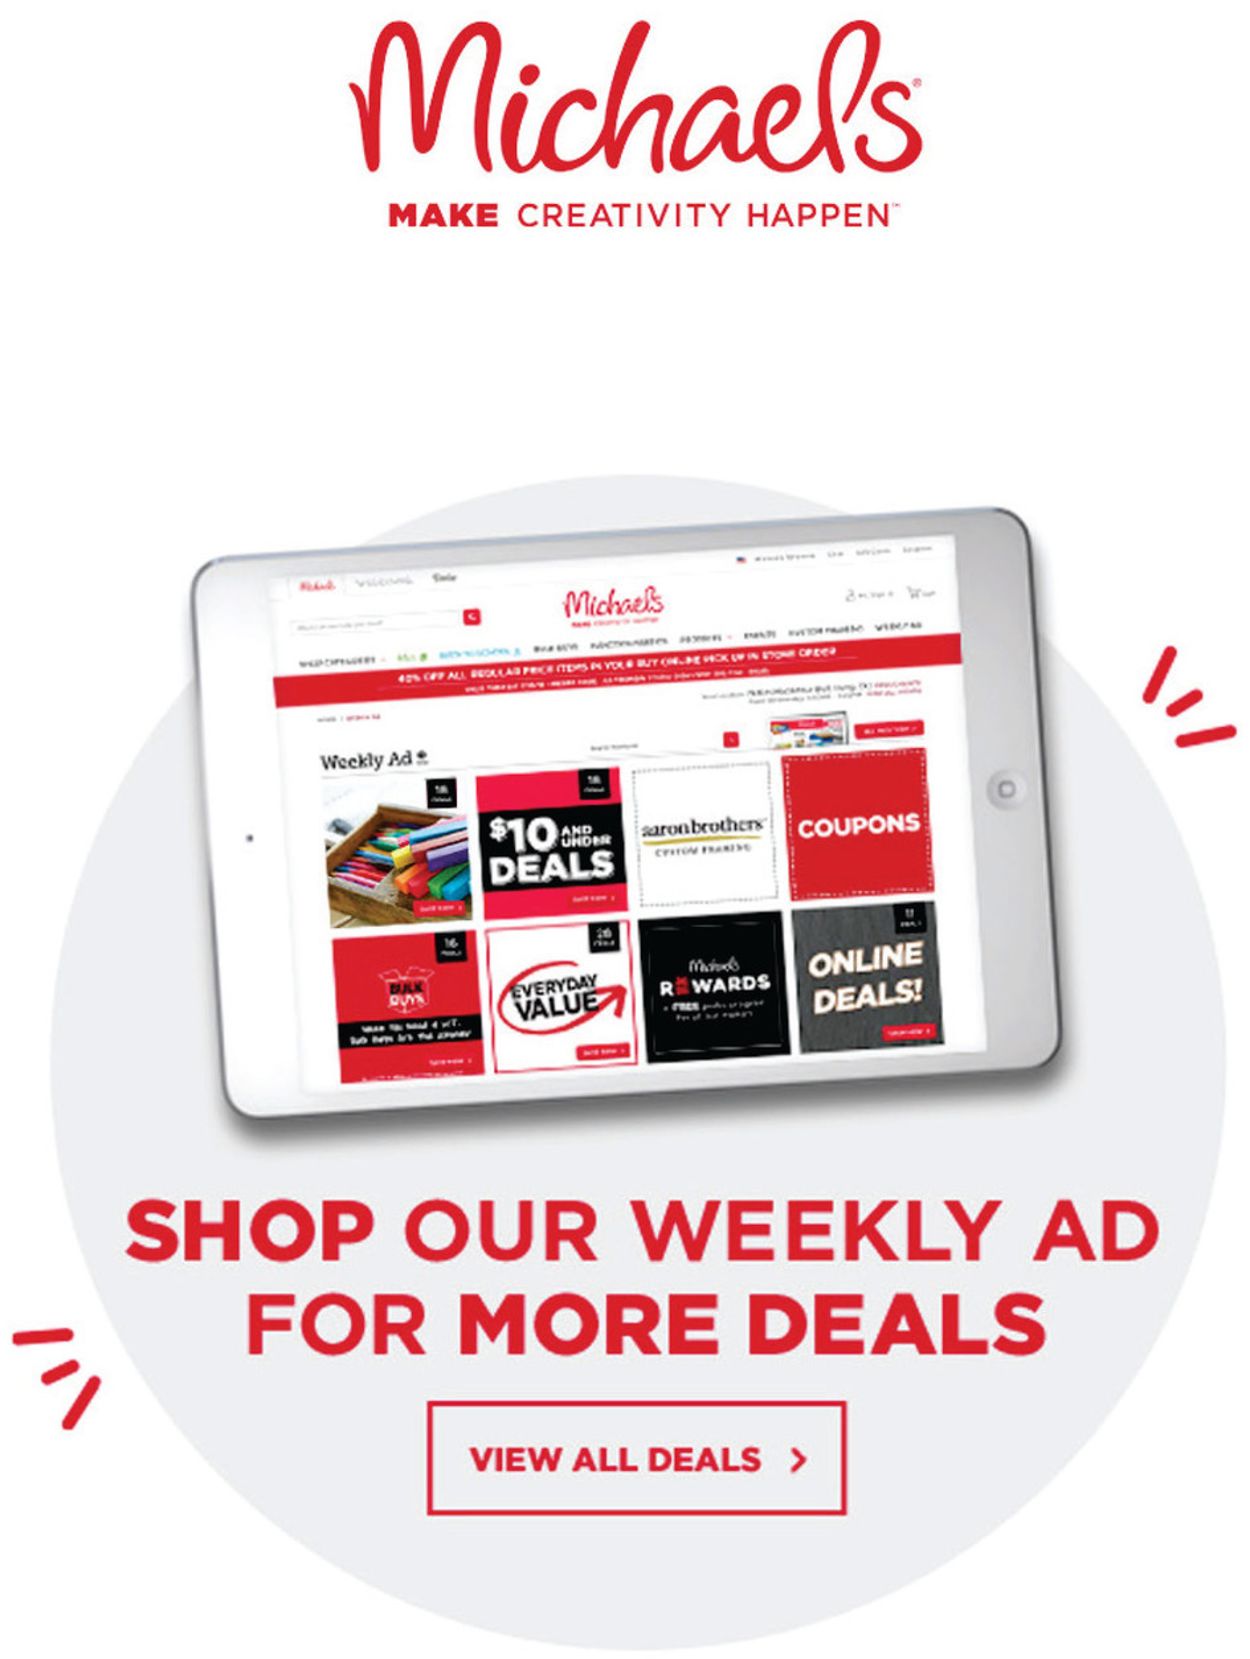 Office DEPOT Ad from 09/20/2020